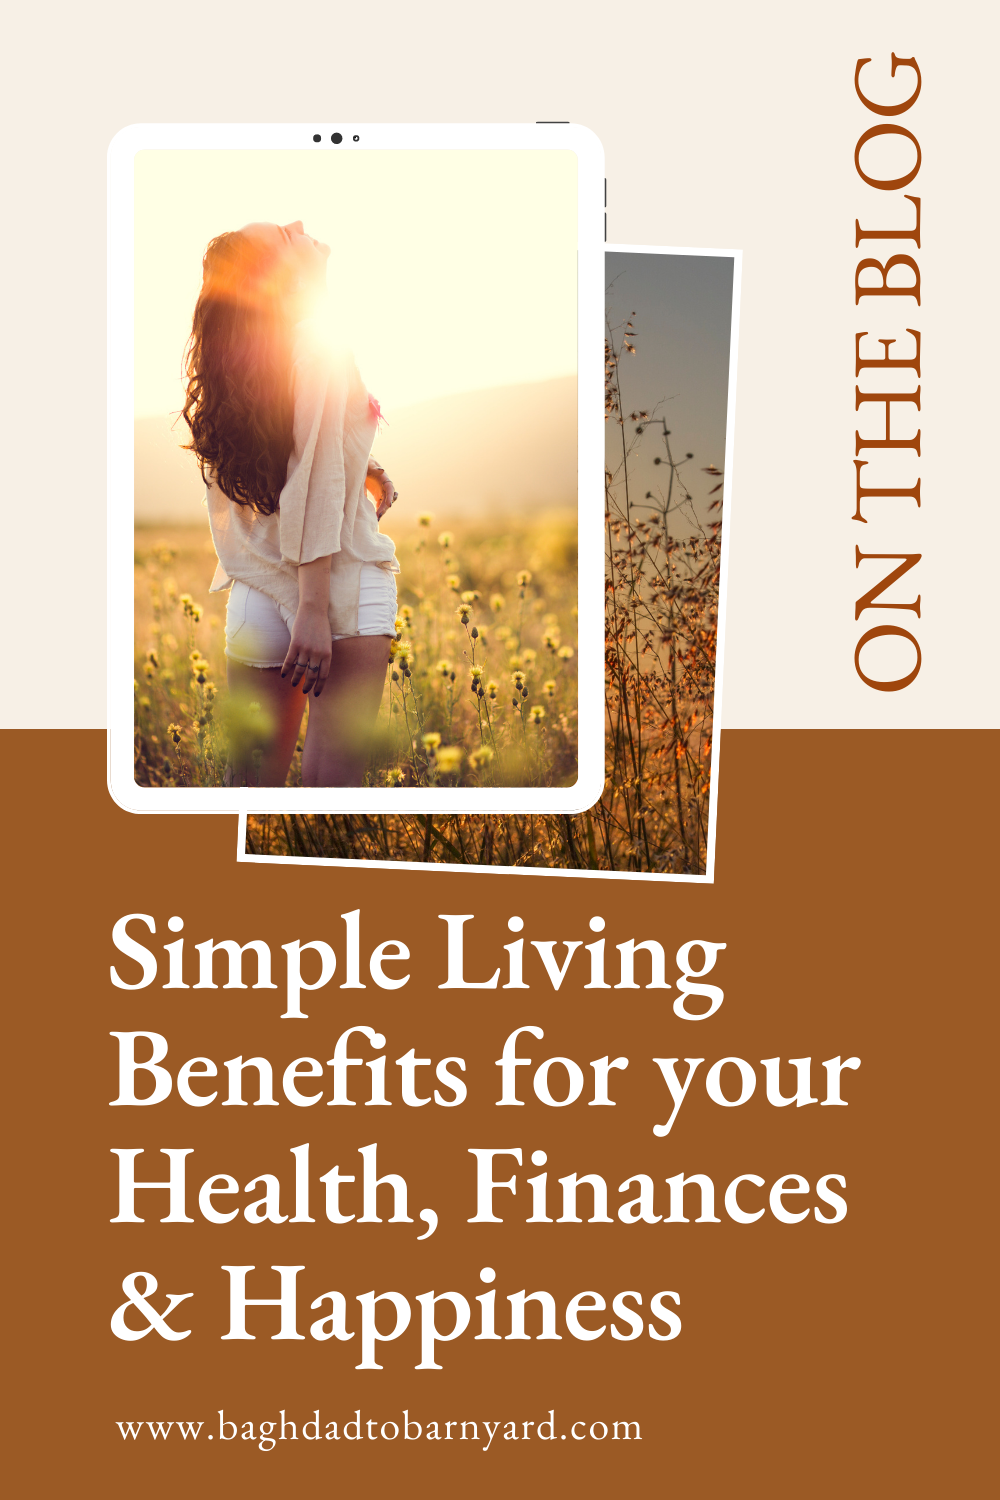 Simple living benefits for your health, finances and happiness